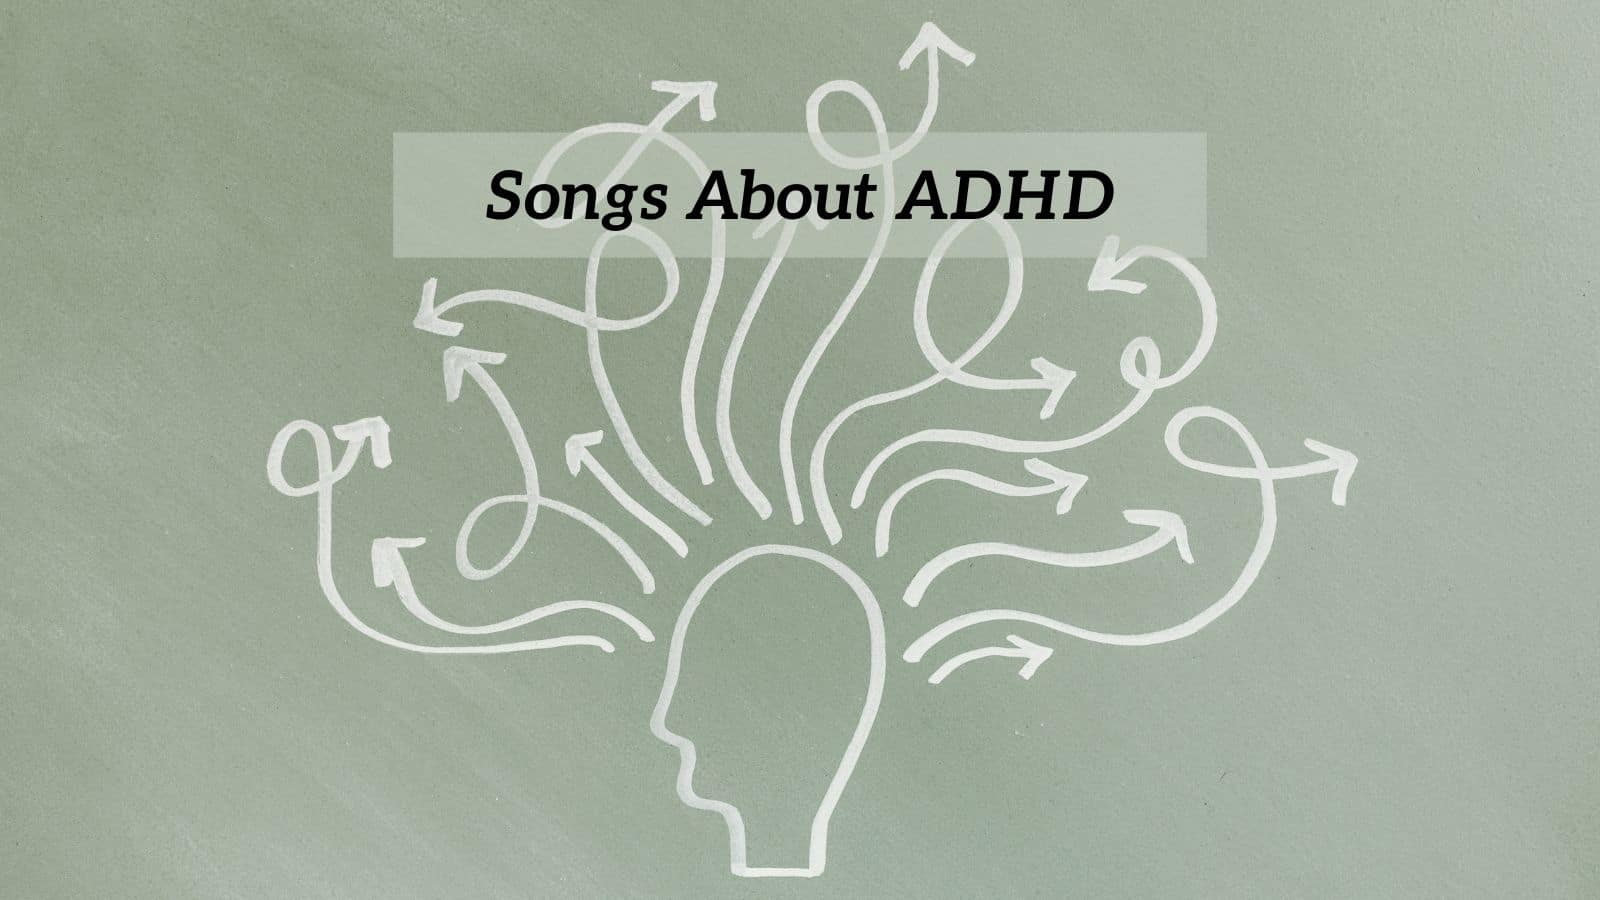 Songs About ADHD